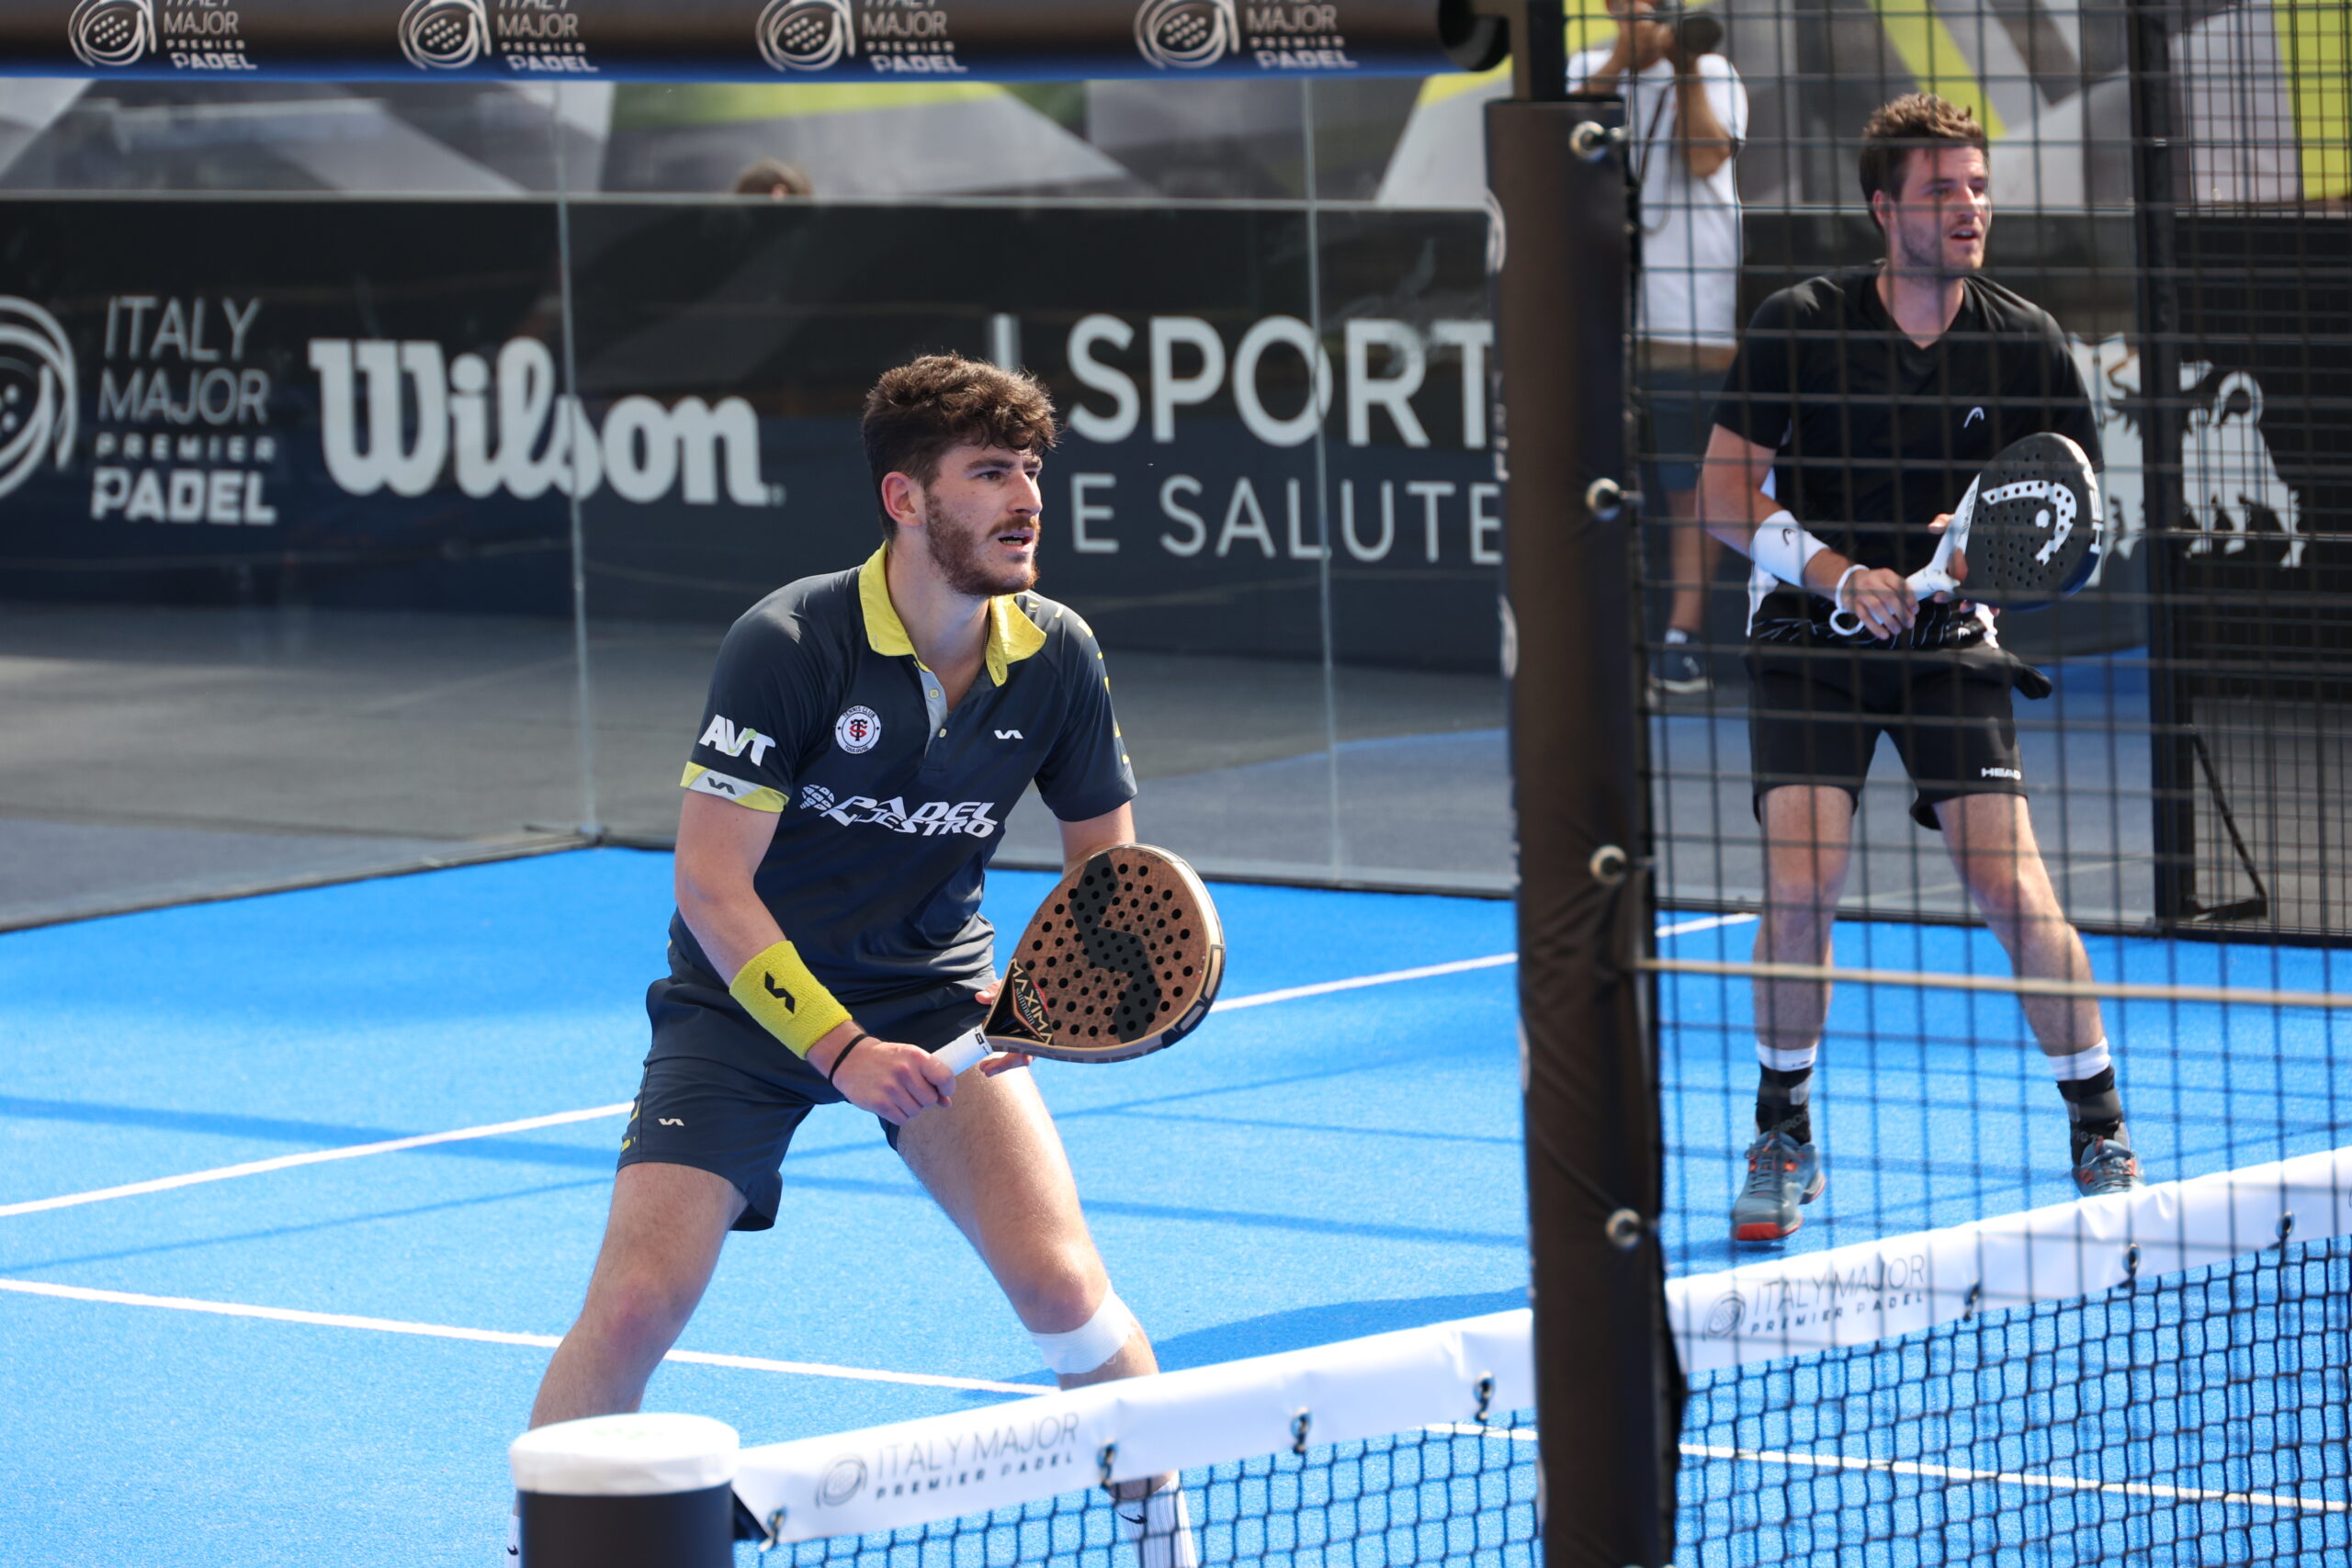 Italy Major Premier Padel : 4 French at the gates of the final table!